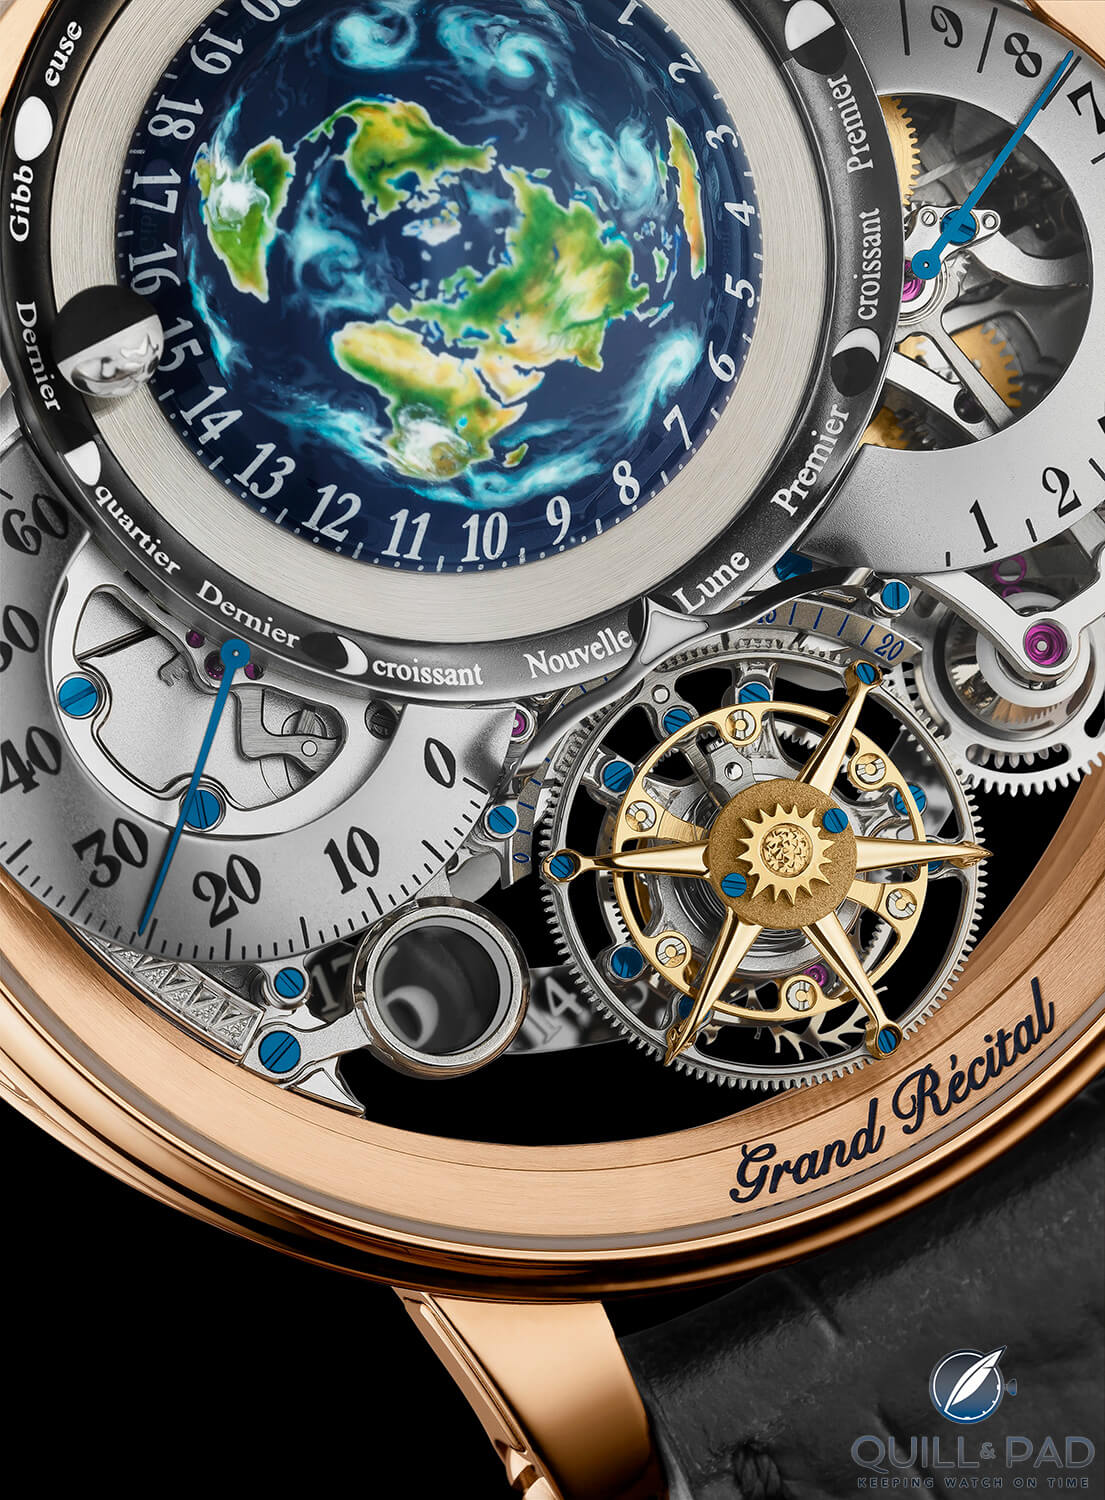 The moon (visible beside the 15 top left) on the Bovet Récital 22